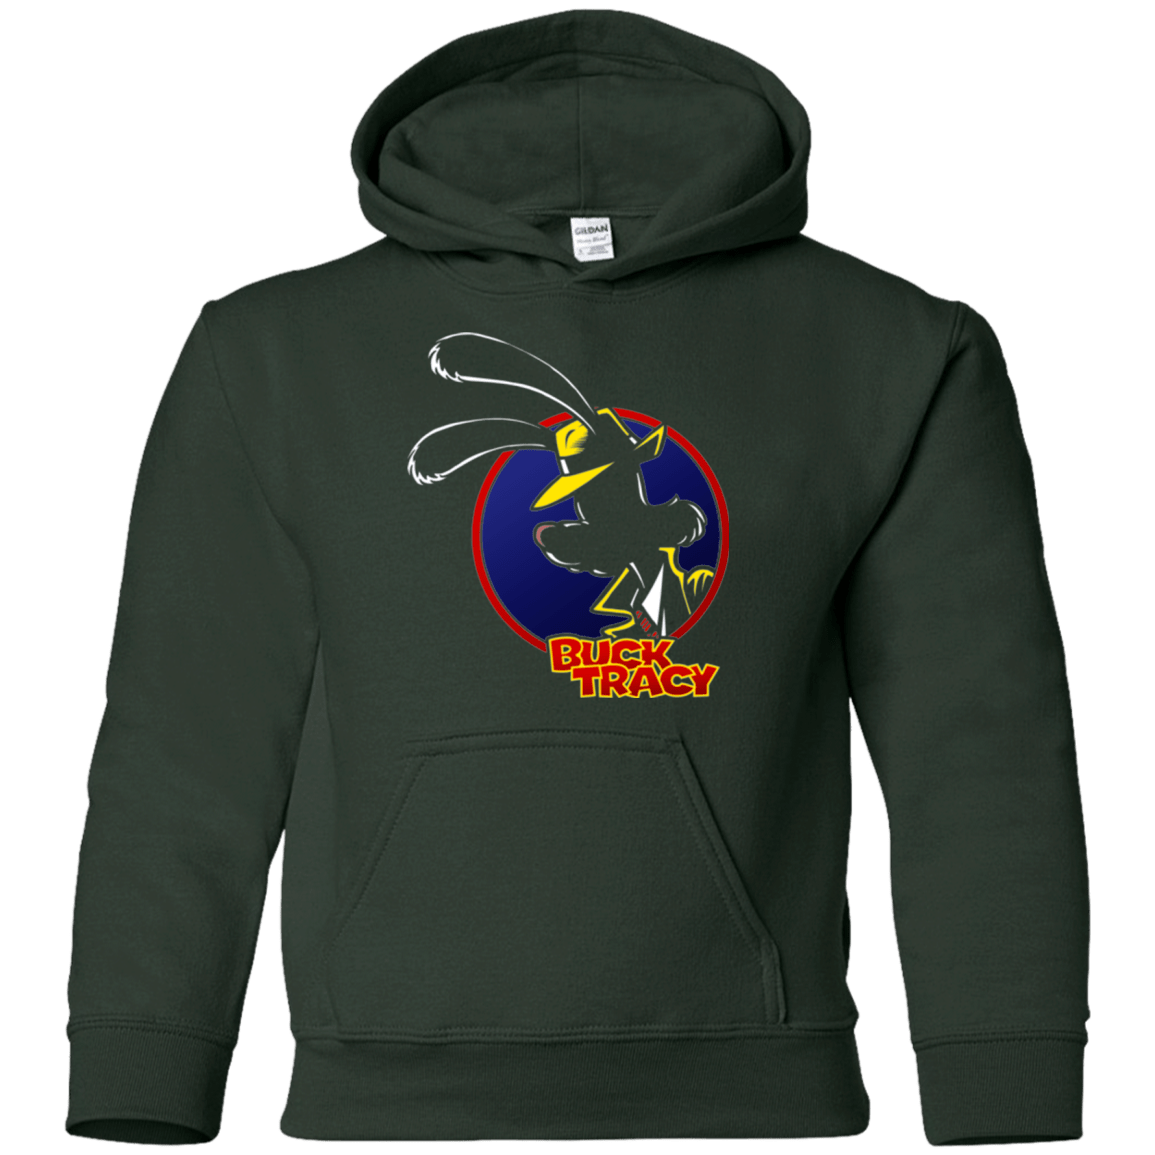 Sweatshirts Forest Green / YS Buck Tracy Youth Hoodie